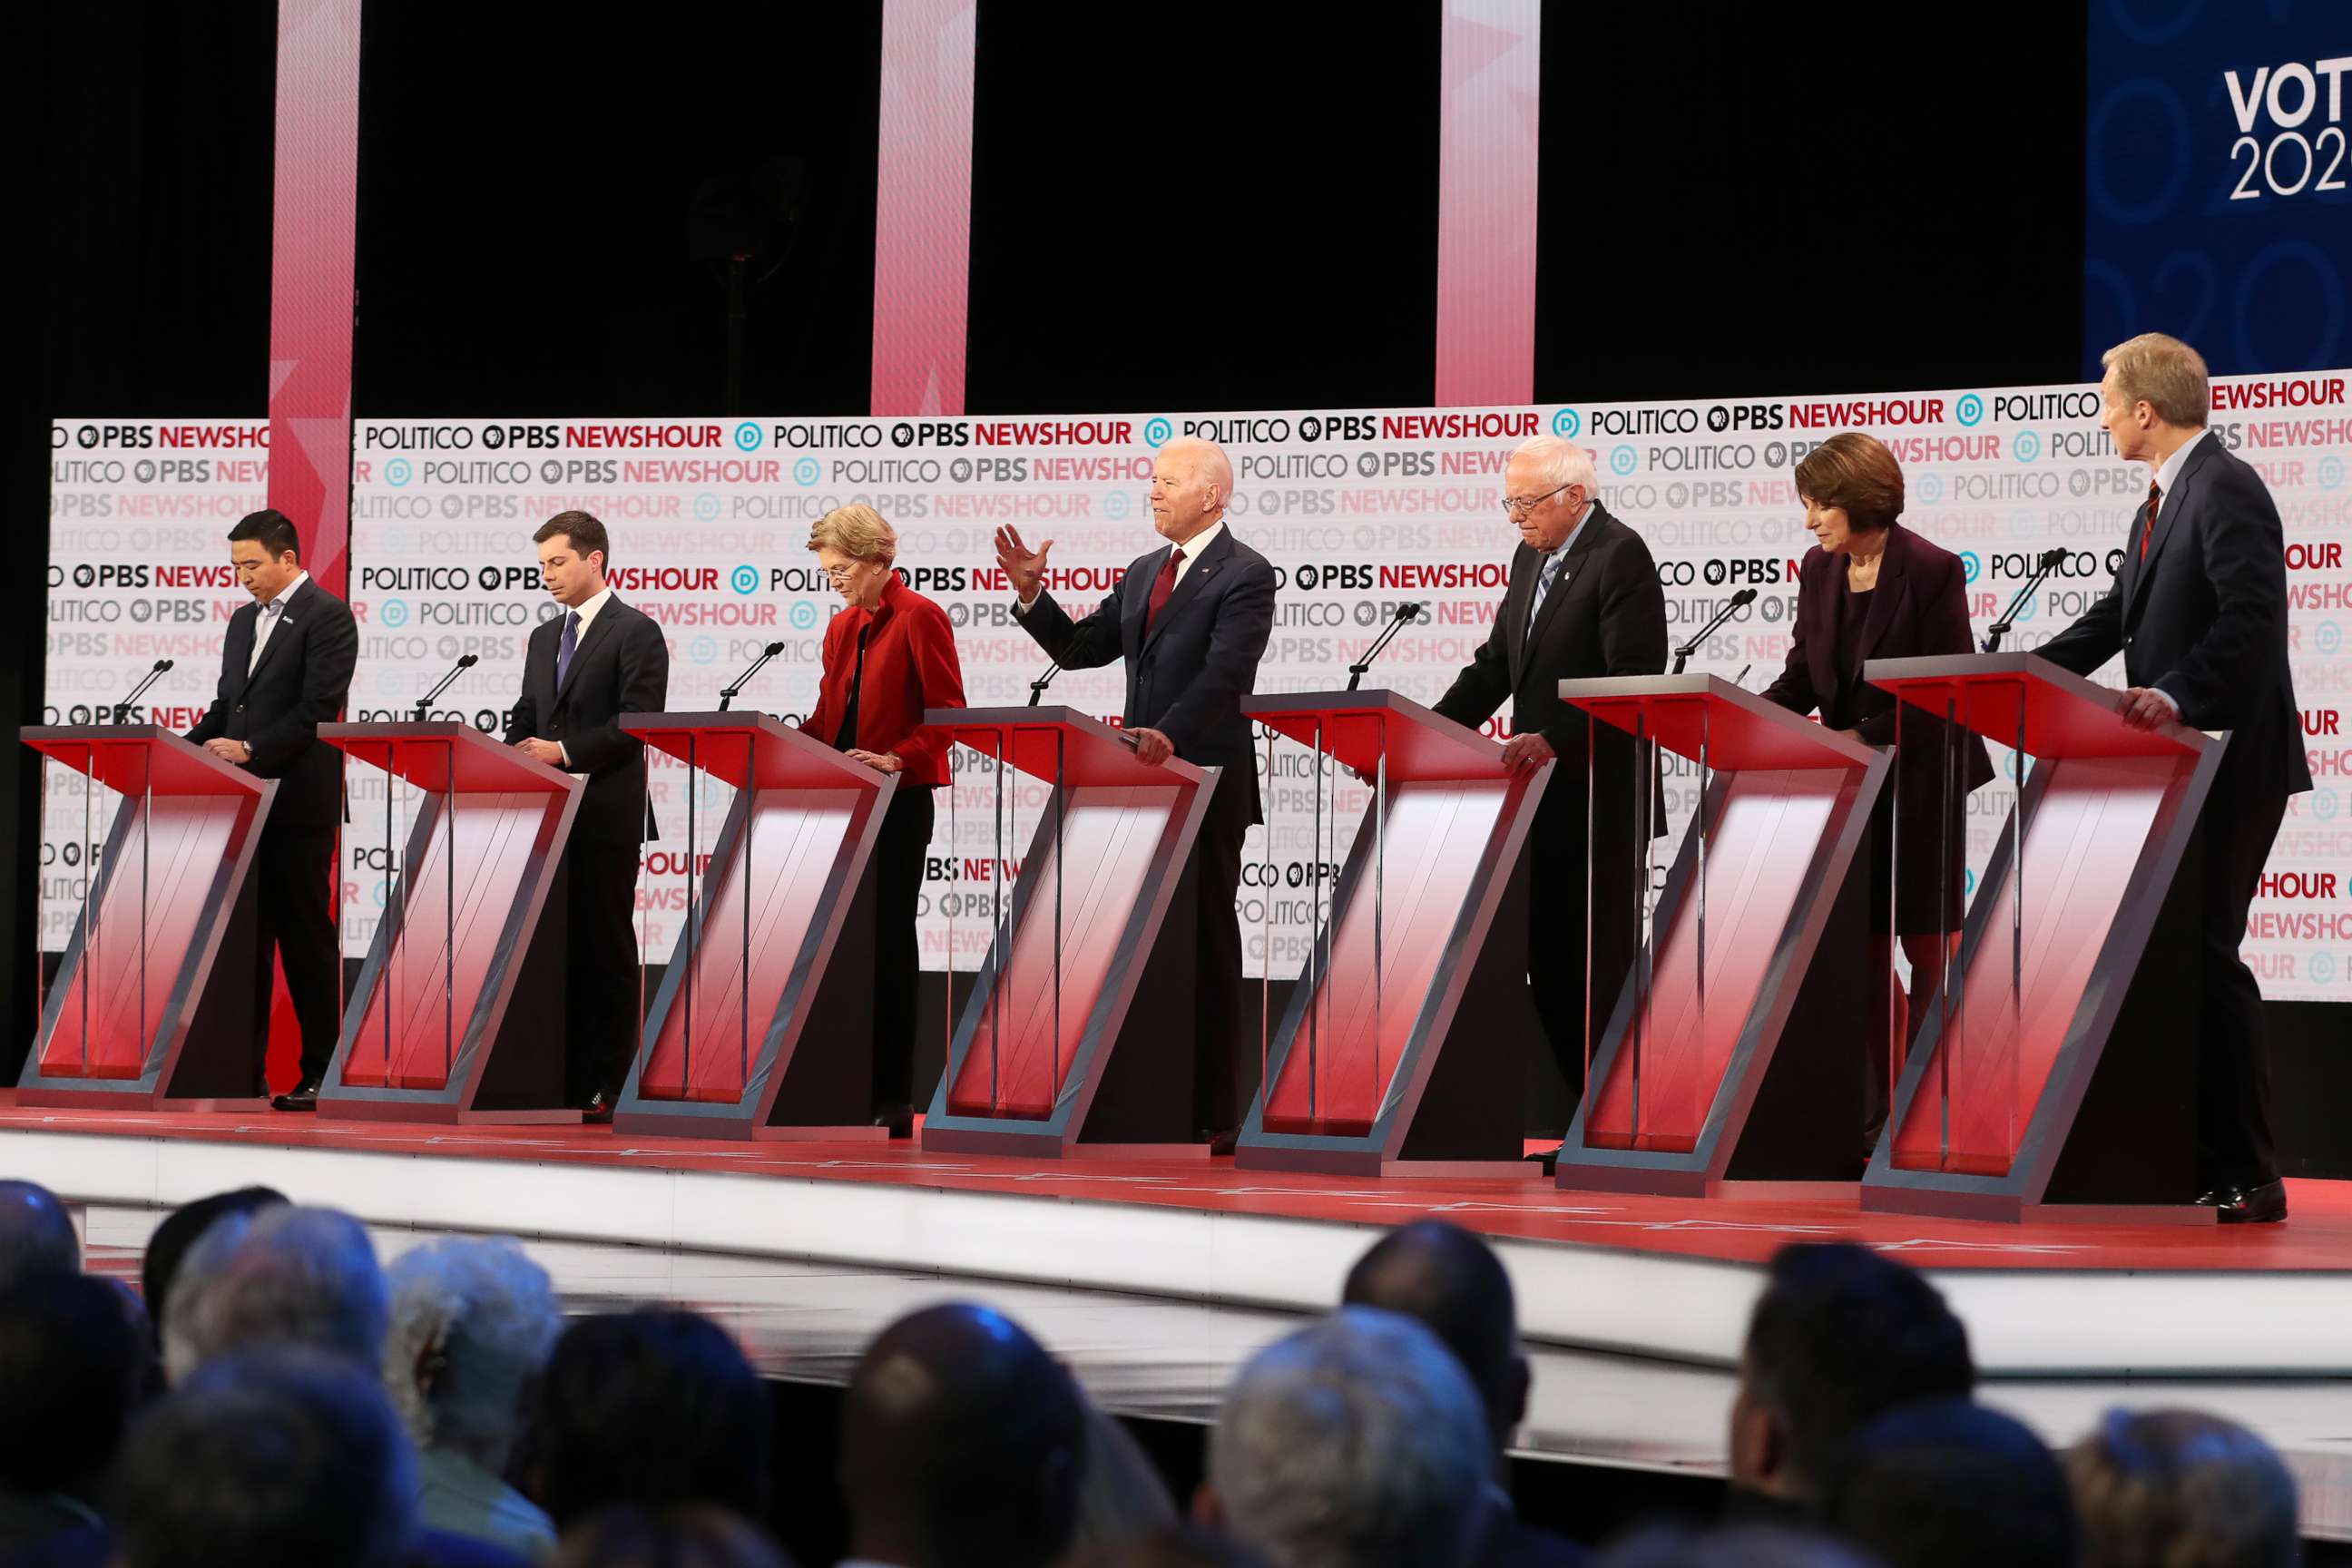 PHOTO: Democratic presidential candidates listen during the Democratic presidential primary debate at Loyola Marymount University on December 19, 2019 in Los Angeles, California.